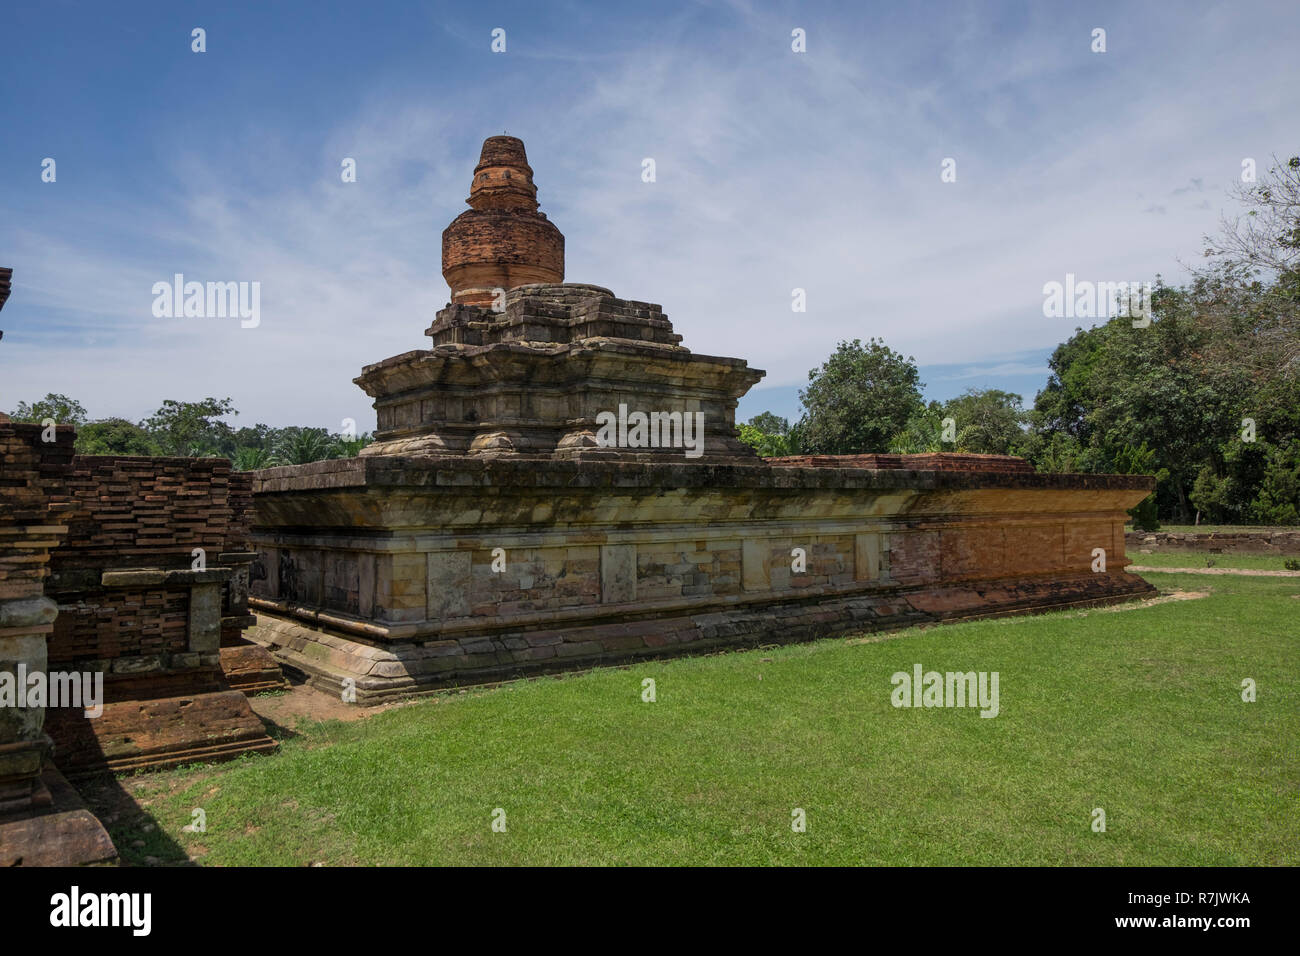 At the temple ruins of Muara Takus near Pekanbaru, Indonesia. The complex is a set of old Buddhist temples. Stock Photo